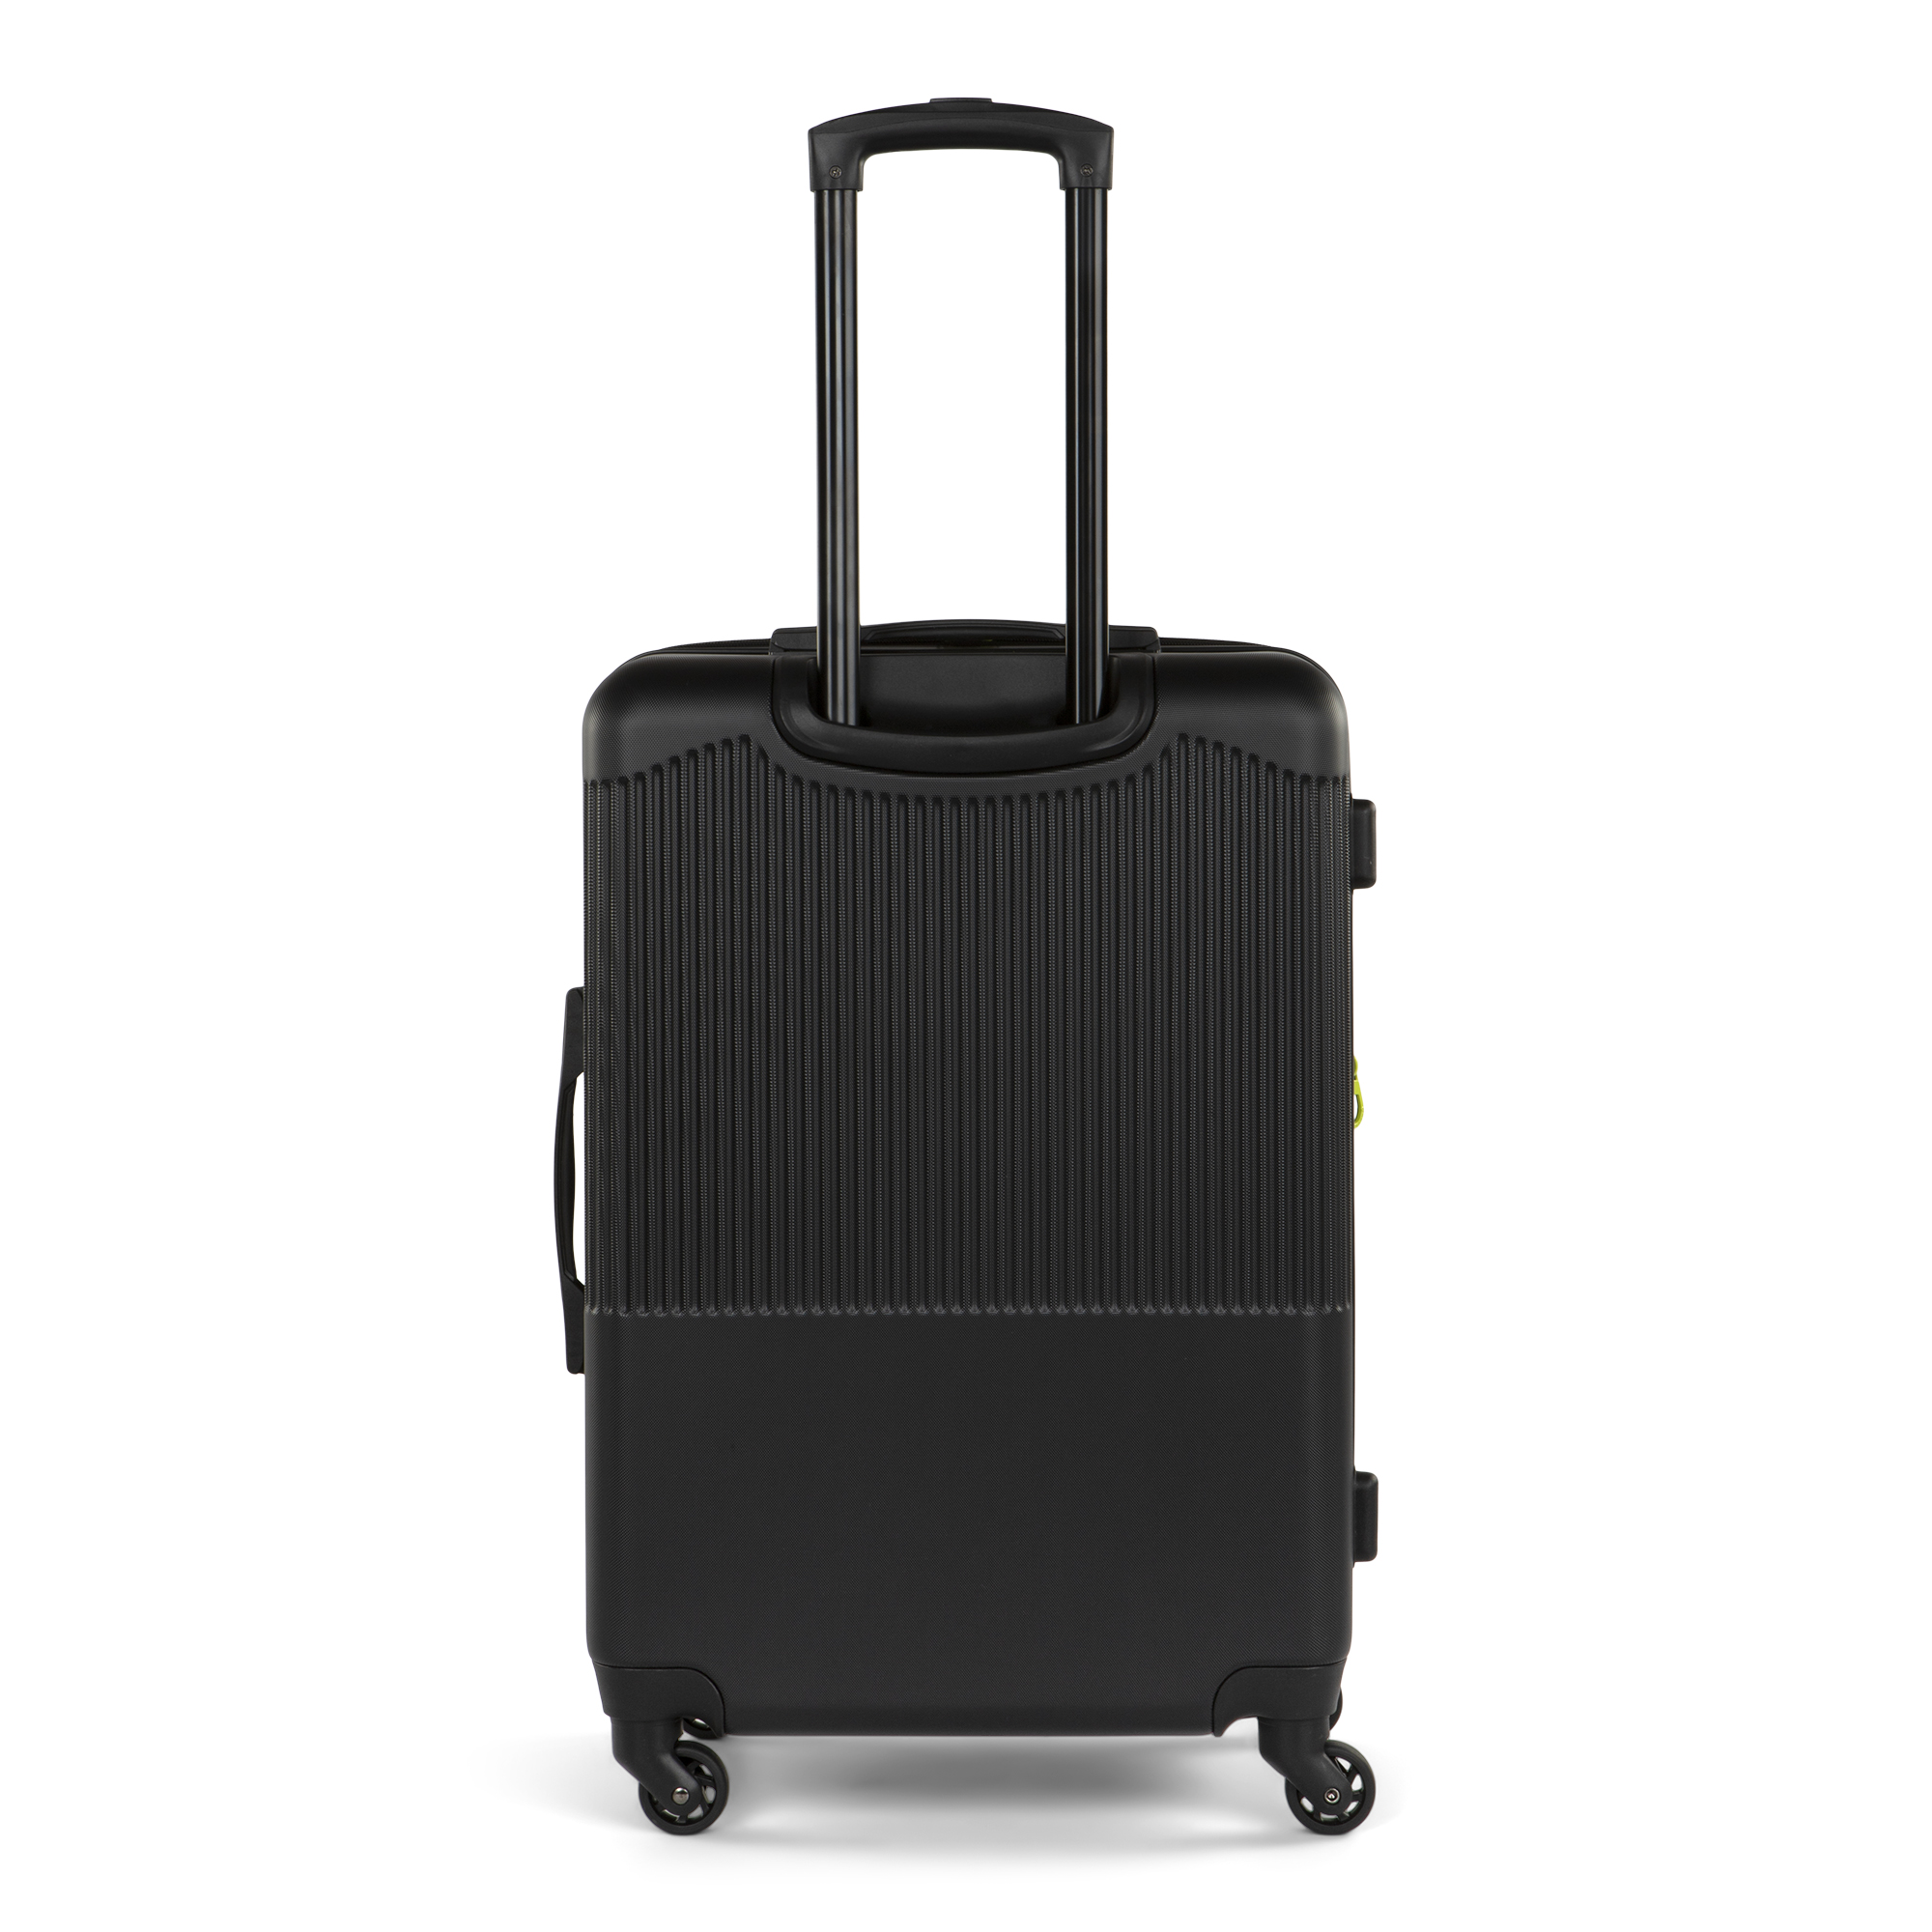 Reebok - Time Out Collection - 24-inch Hardside Luggage - ABS/PC ...